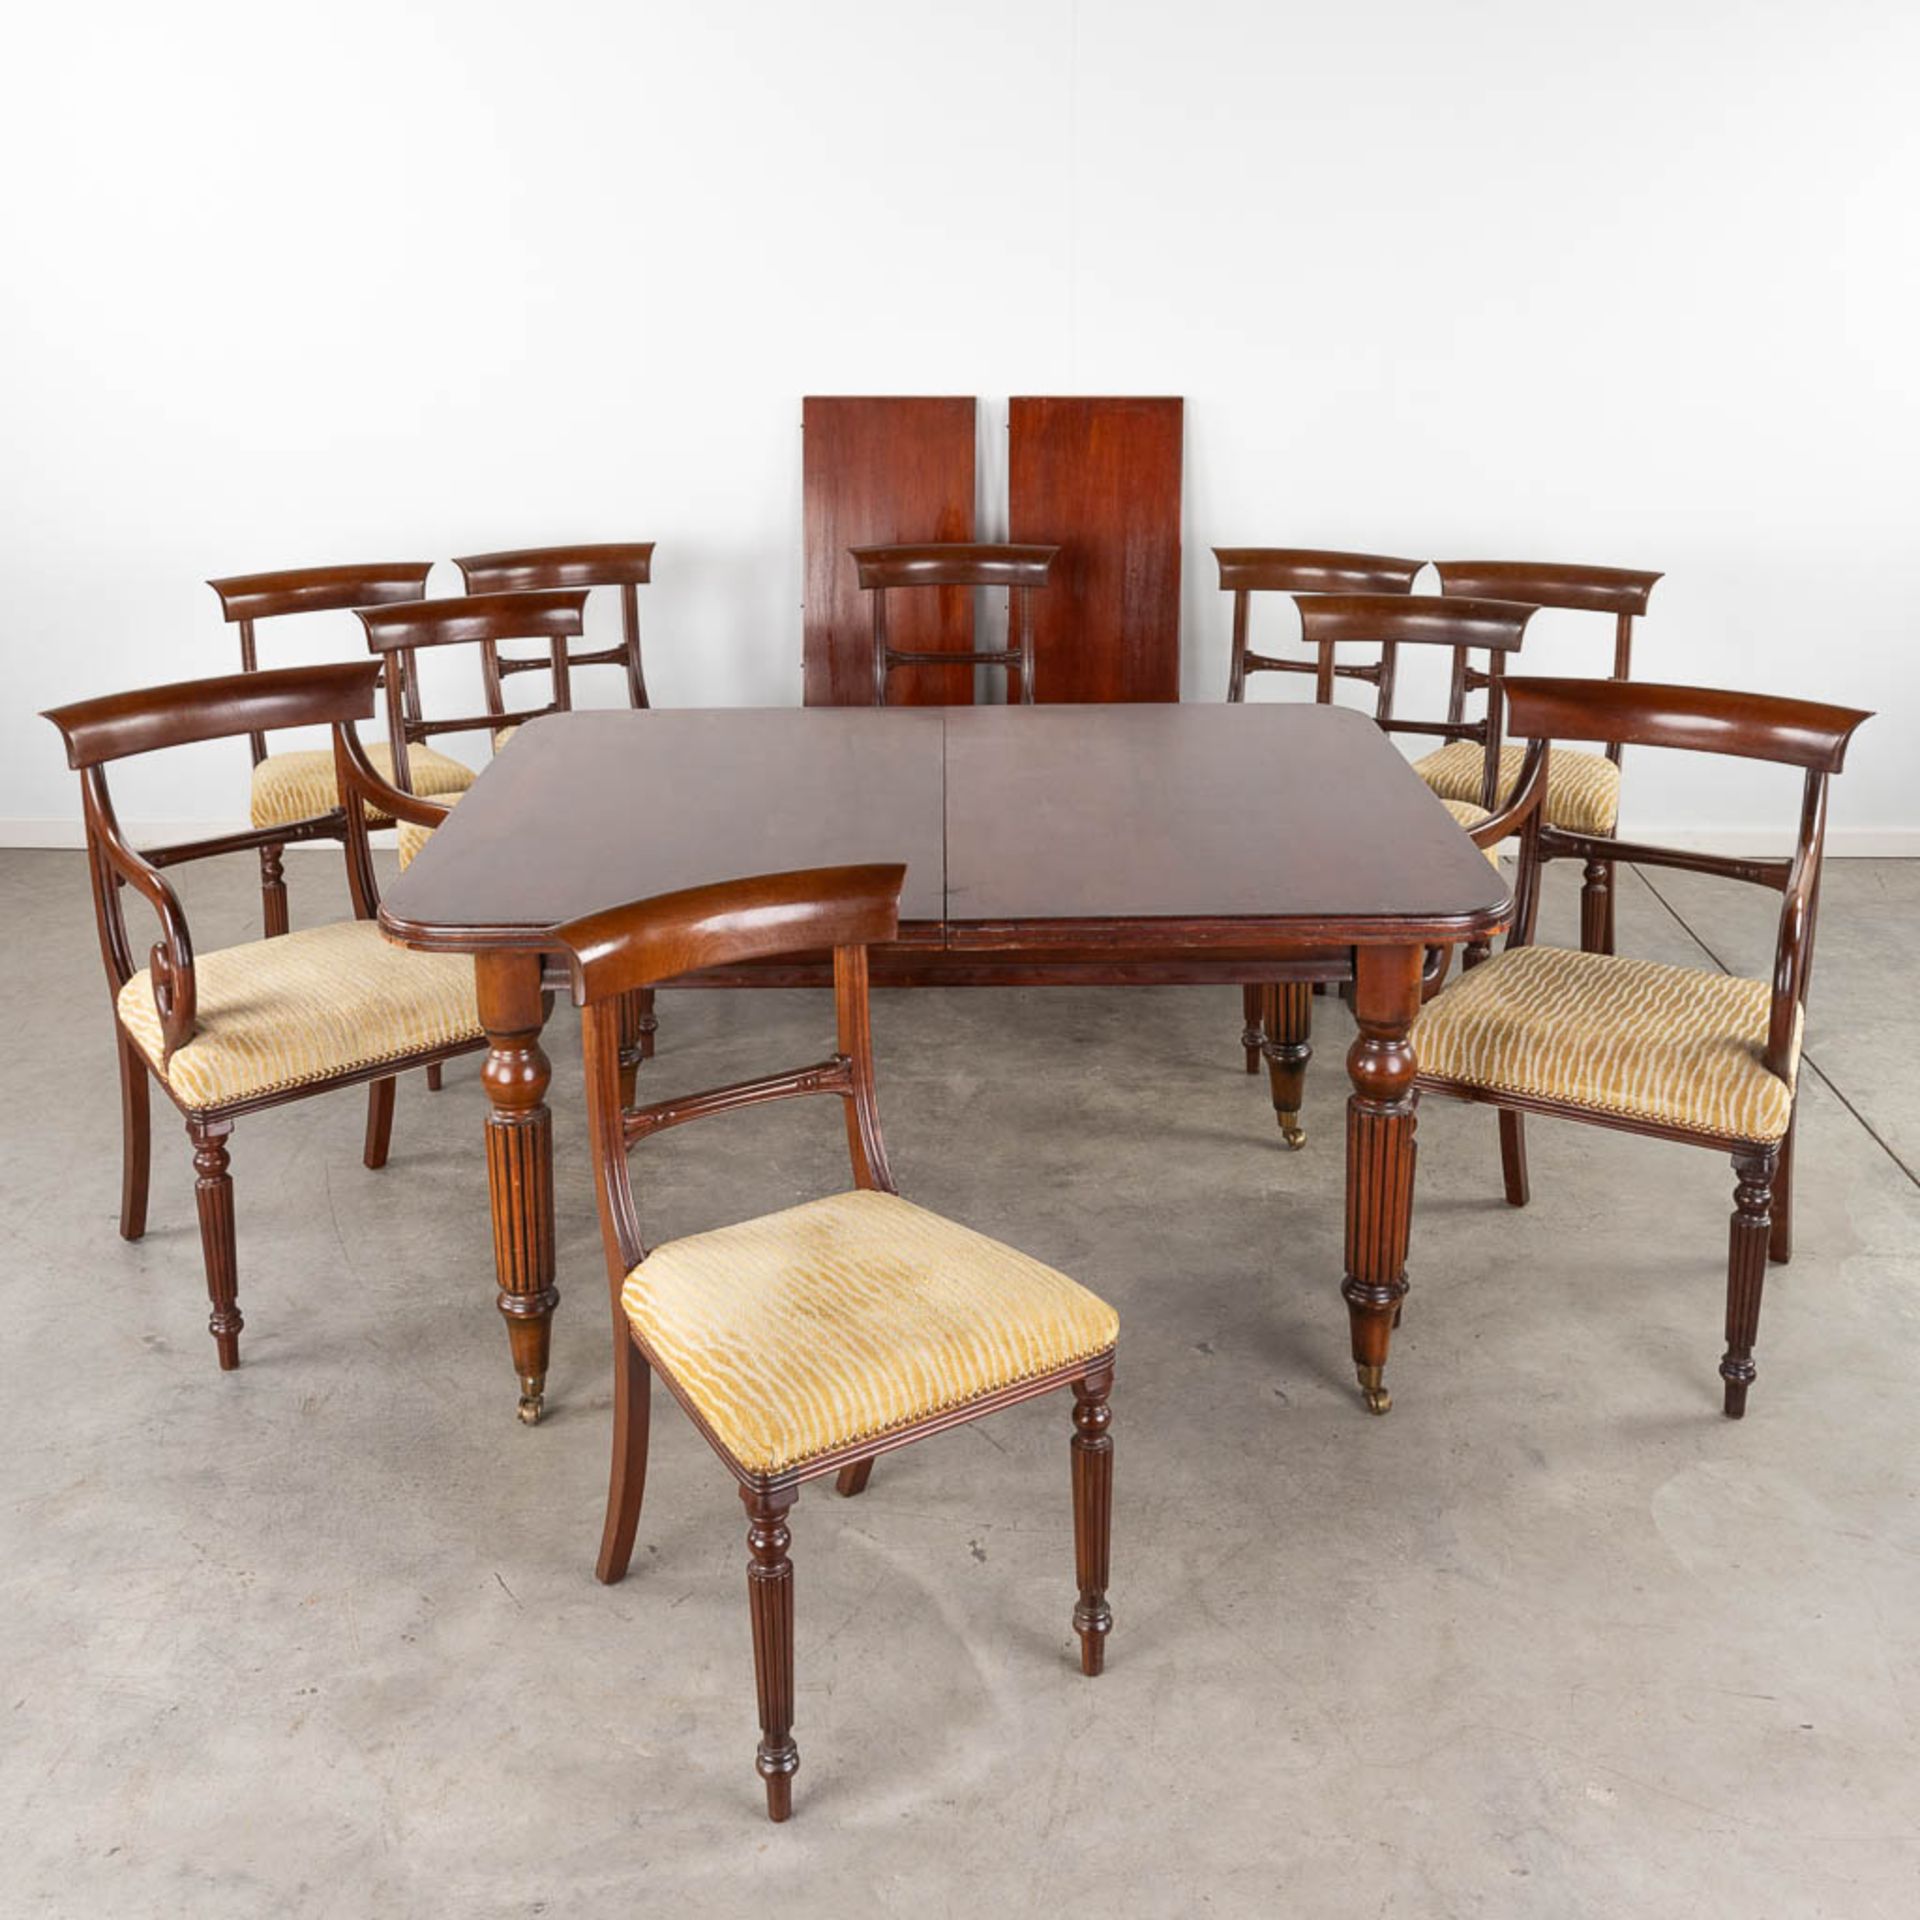 An extendible table, 6 chairs and two armchairs, Mahogany. England. 20th C. (D:144 x W:144 x H:75 cm